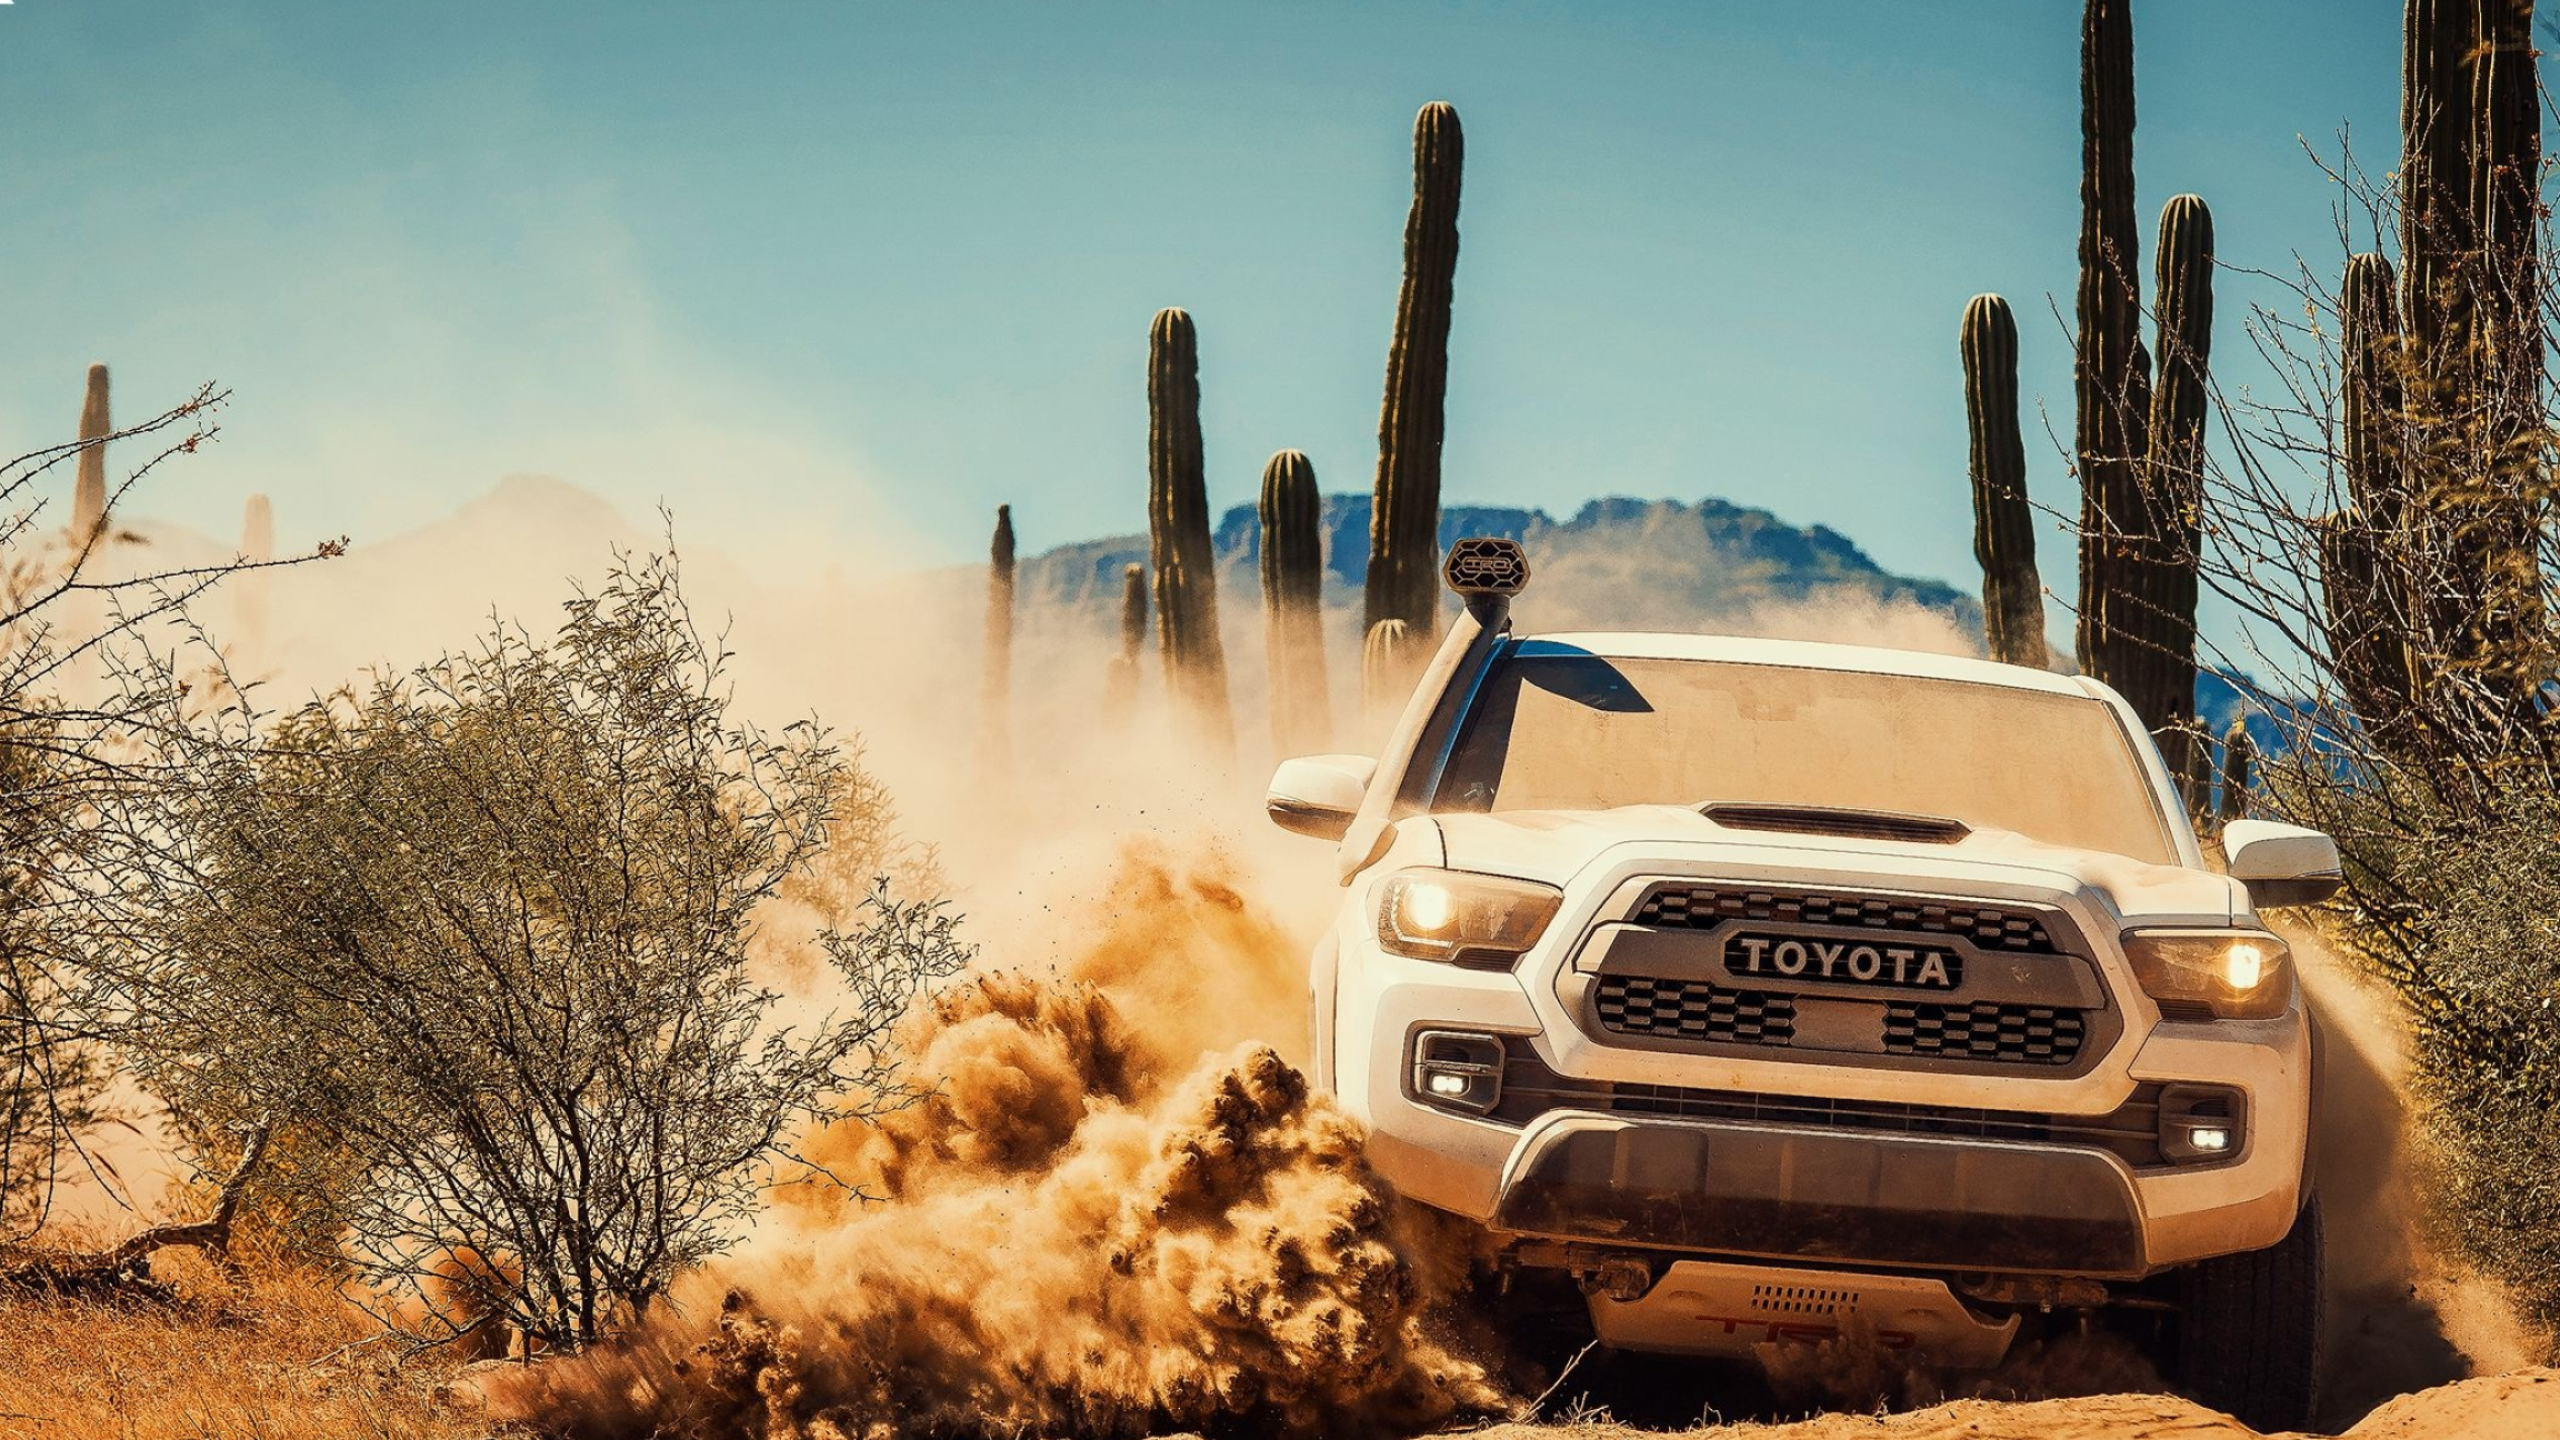 Toyota TRD power, Off-road machines, Rally dominance, Adrenaline-fueled action, 2560x1440 HD Desktop